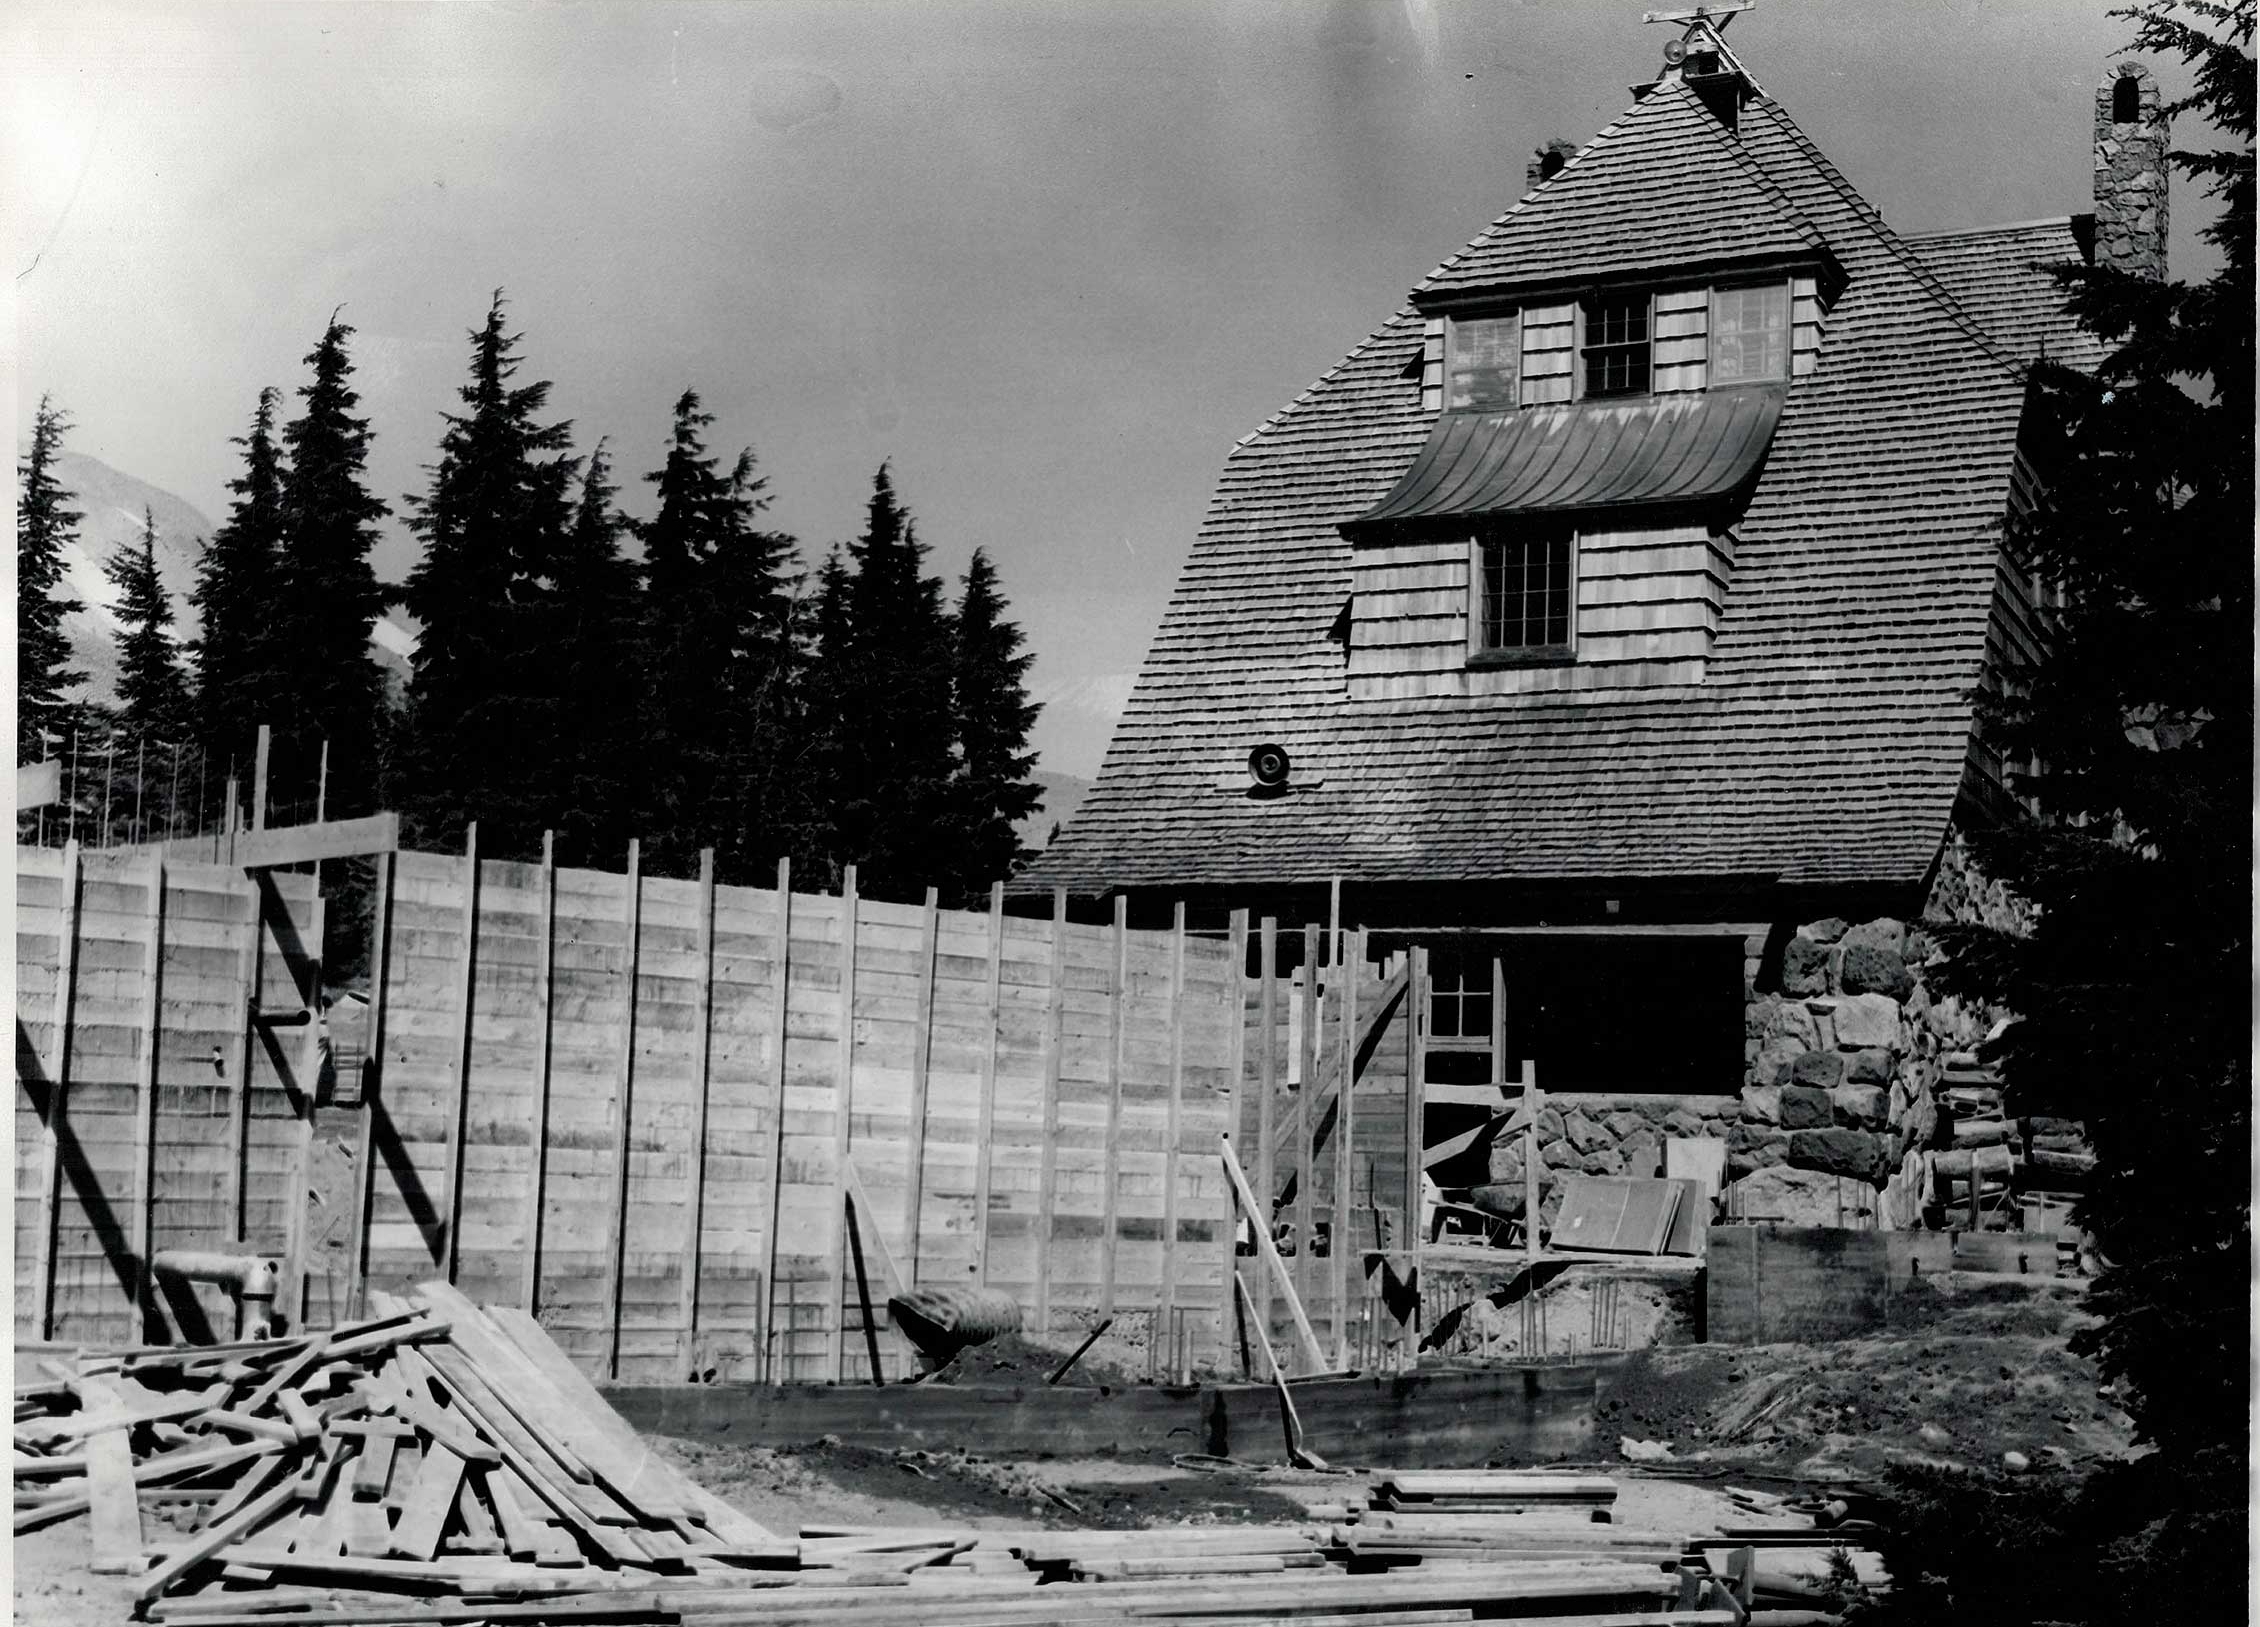 TIMBERLINE POOL CONSTRUCTION PHOTO FROM 1958